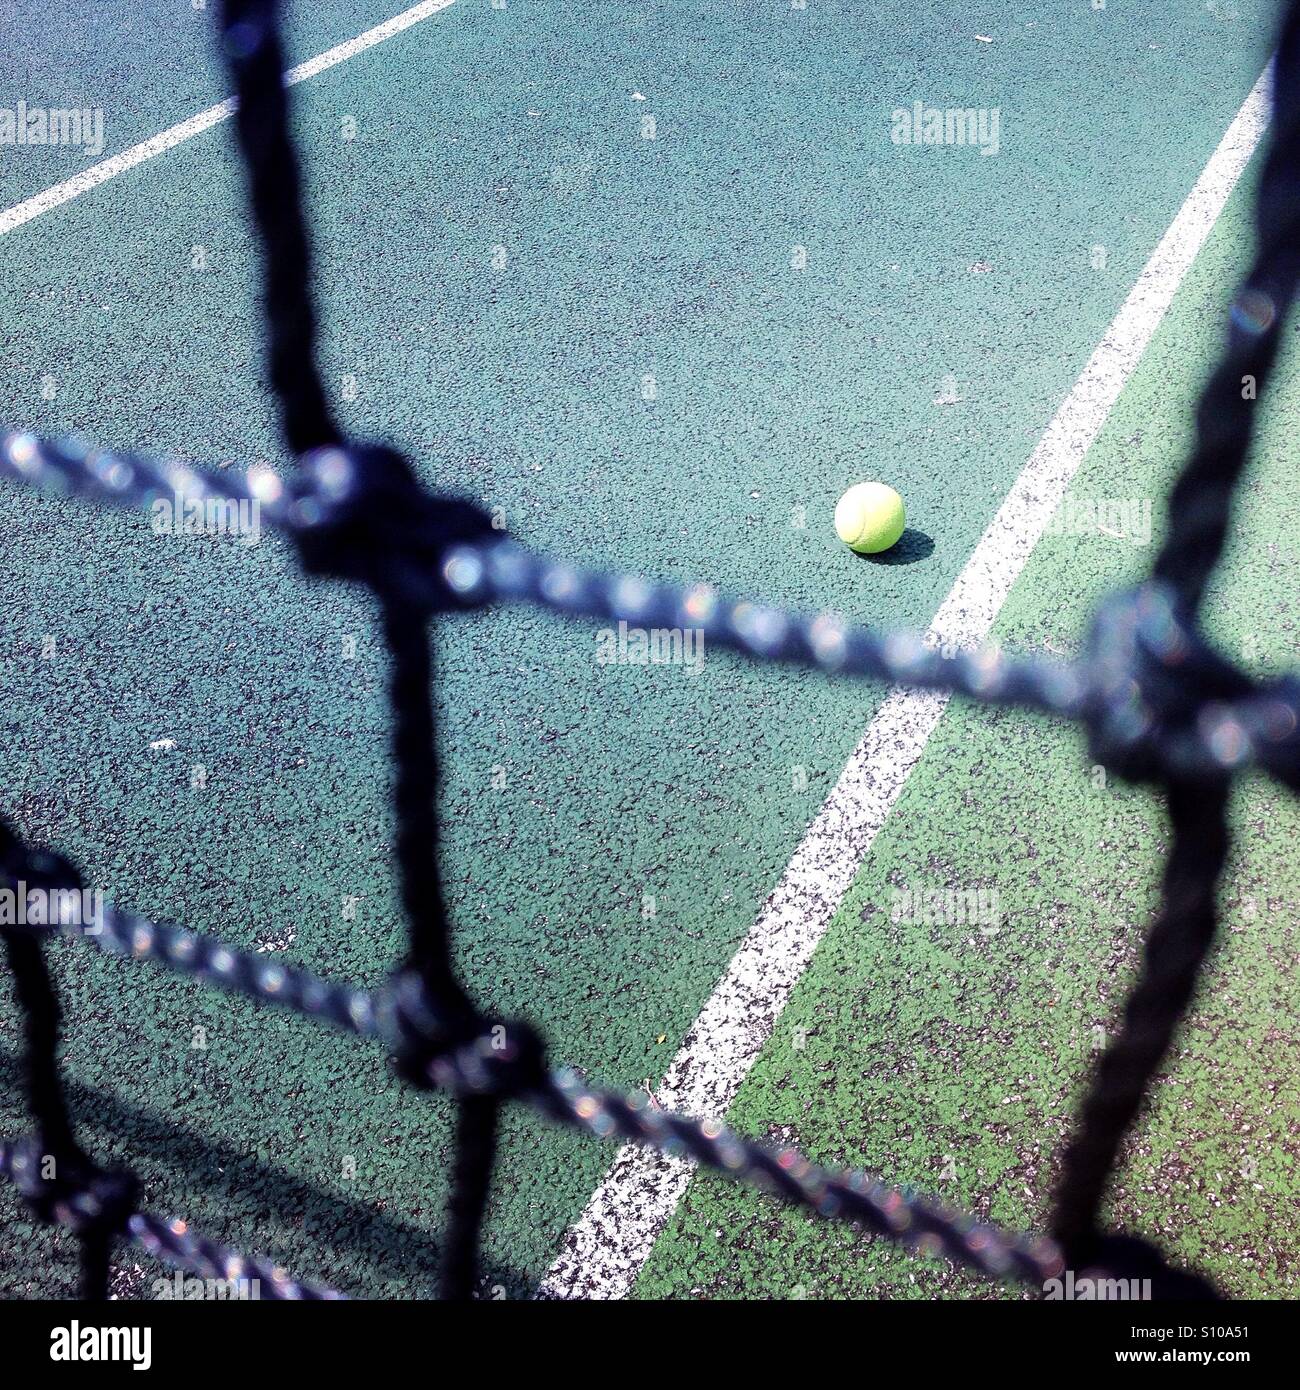 View of a tennis court through the net Stock Photo